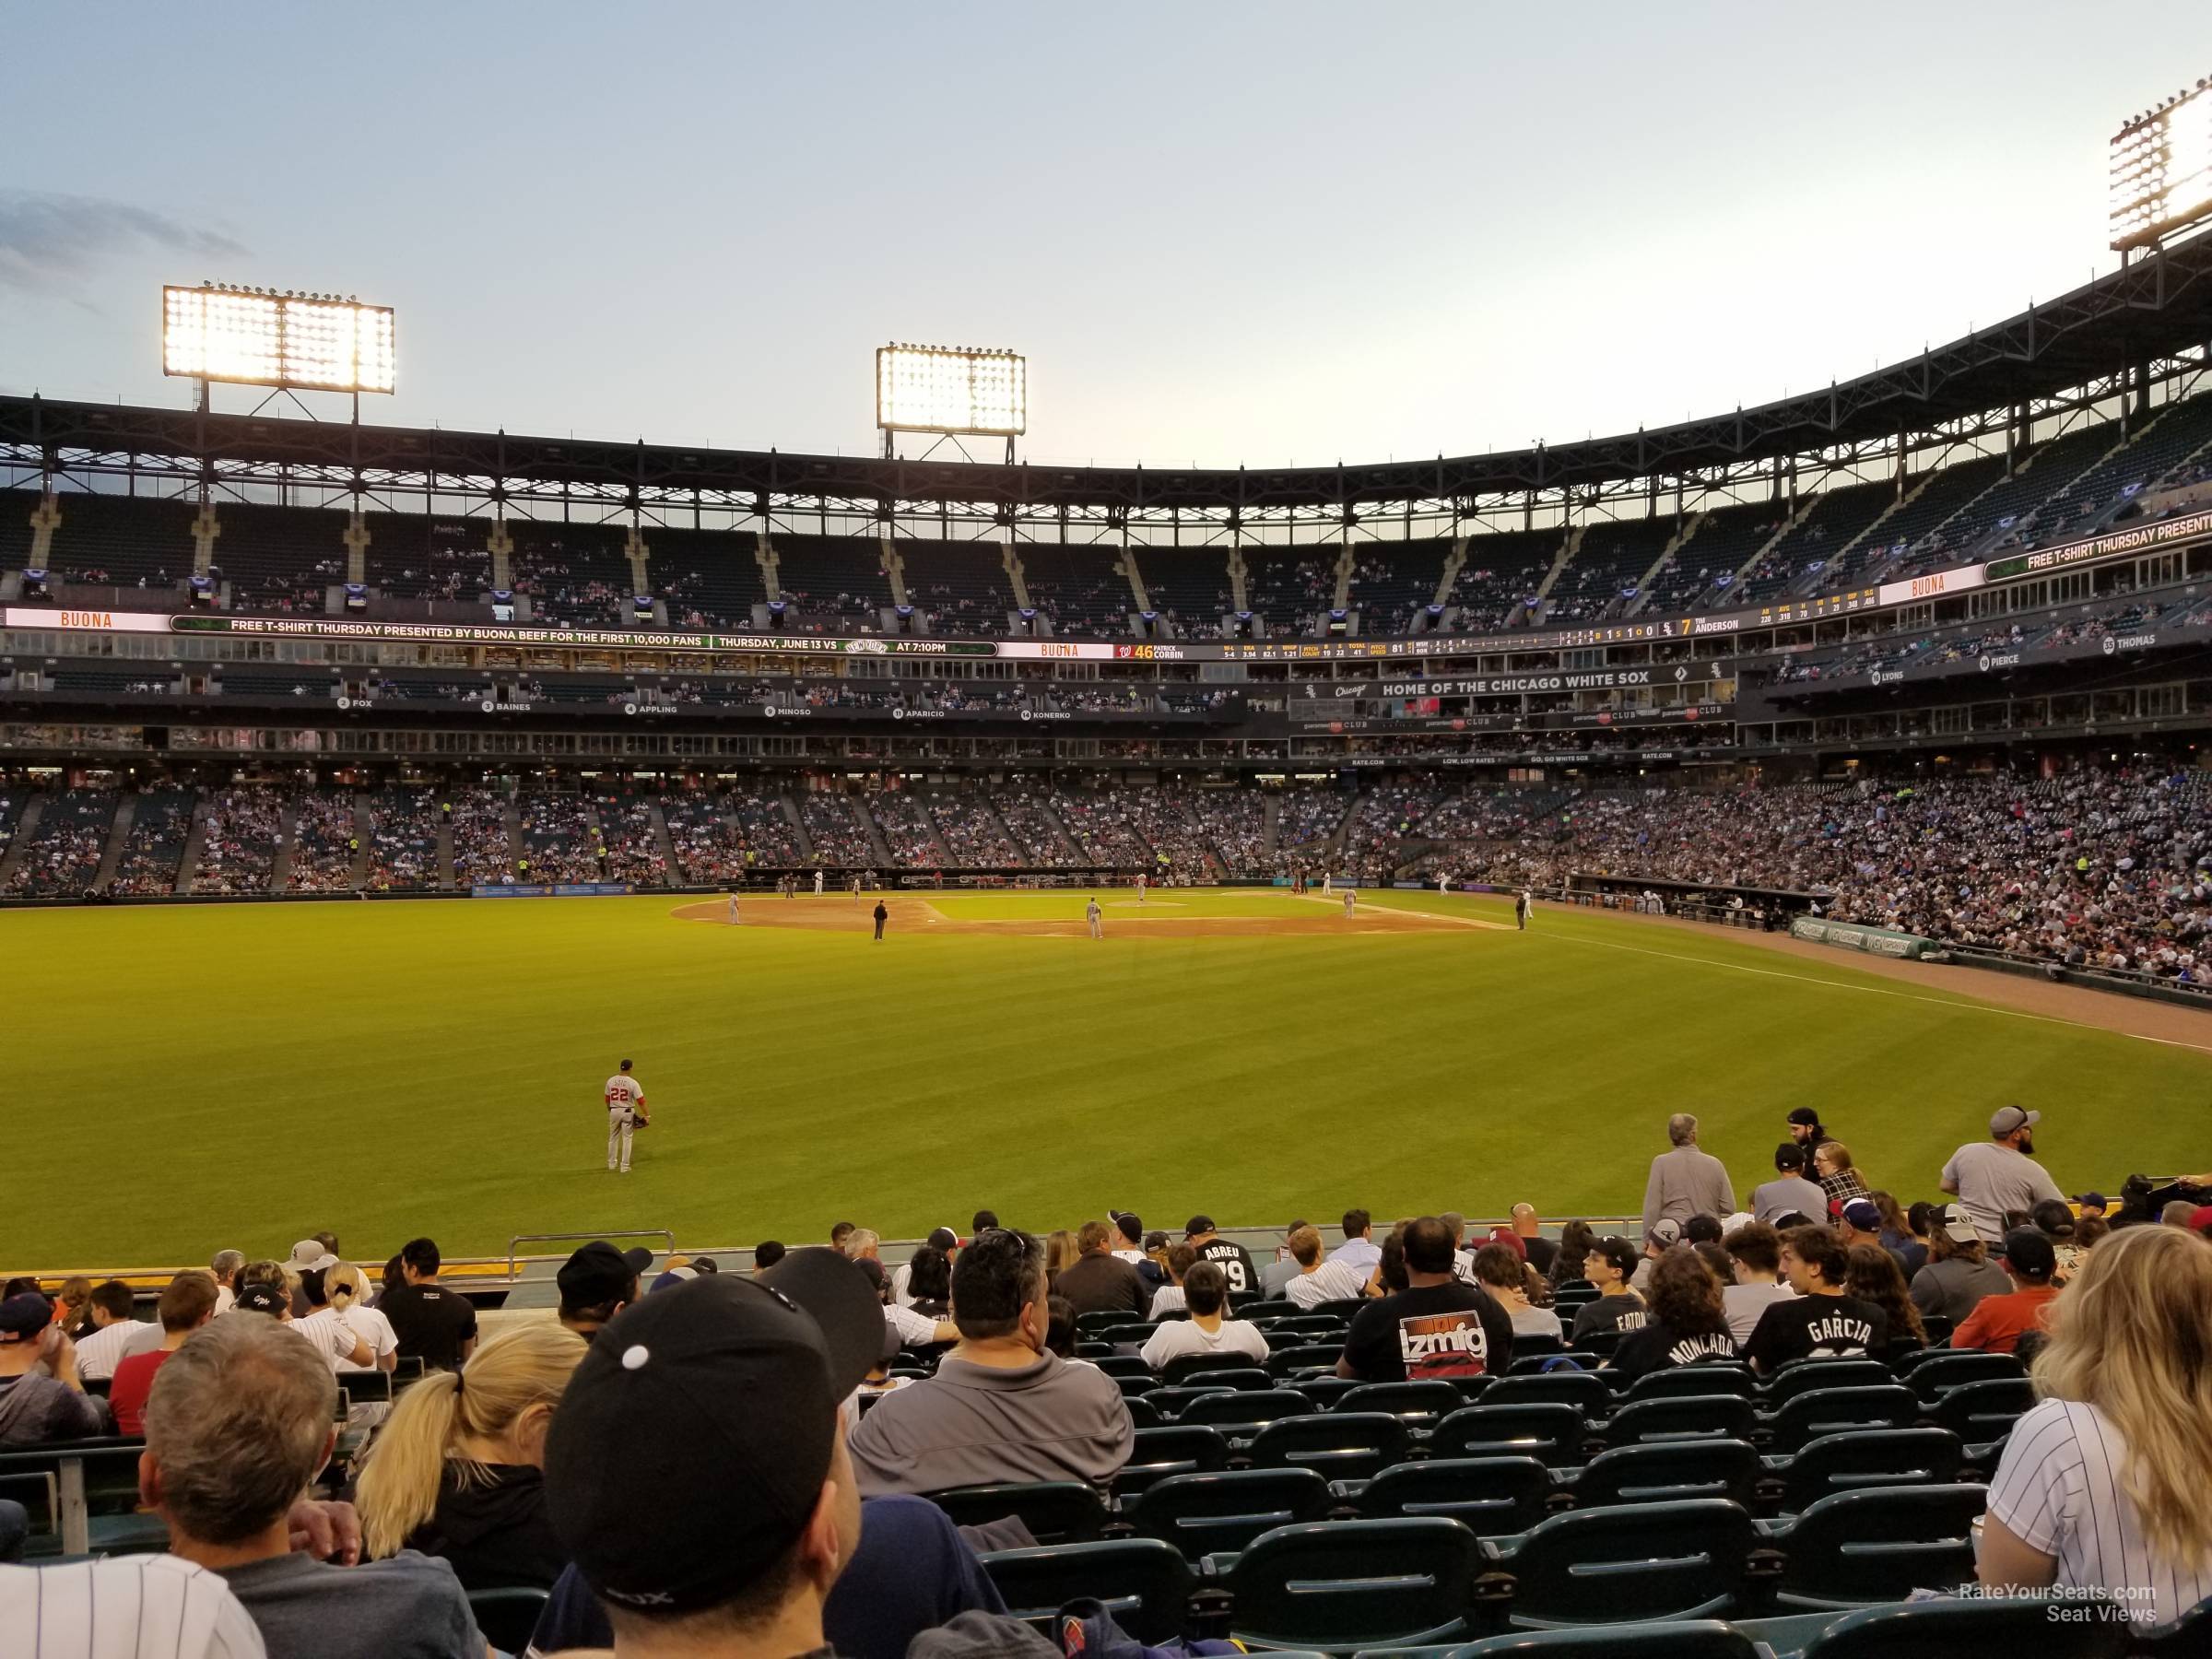 section 159, row 16 seat view  - guaranteed rate field